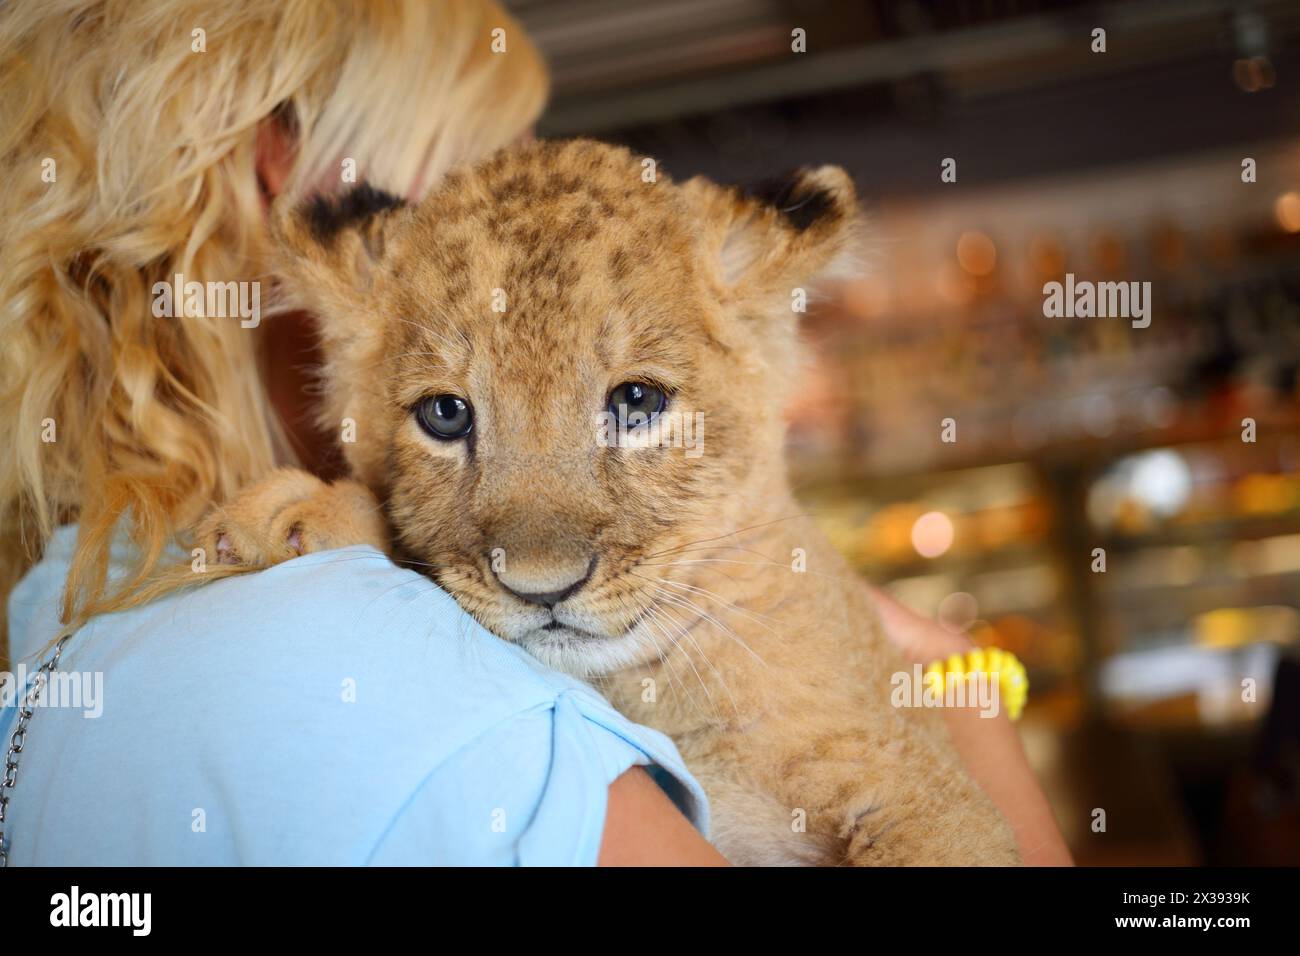 Blonde holds calf of lion on her shoulder, back view, close up Stock Photo